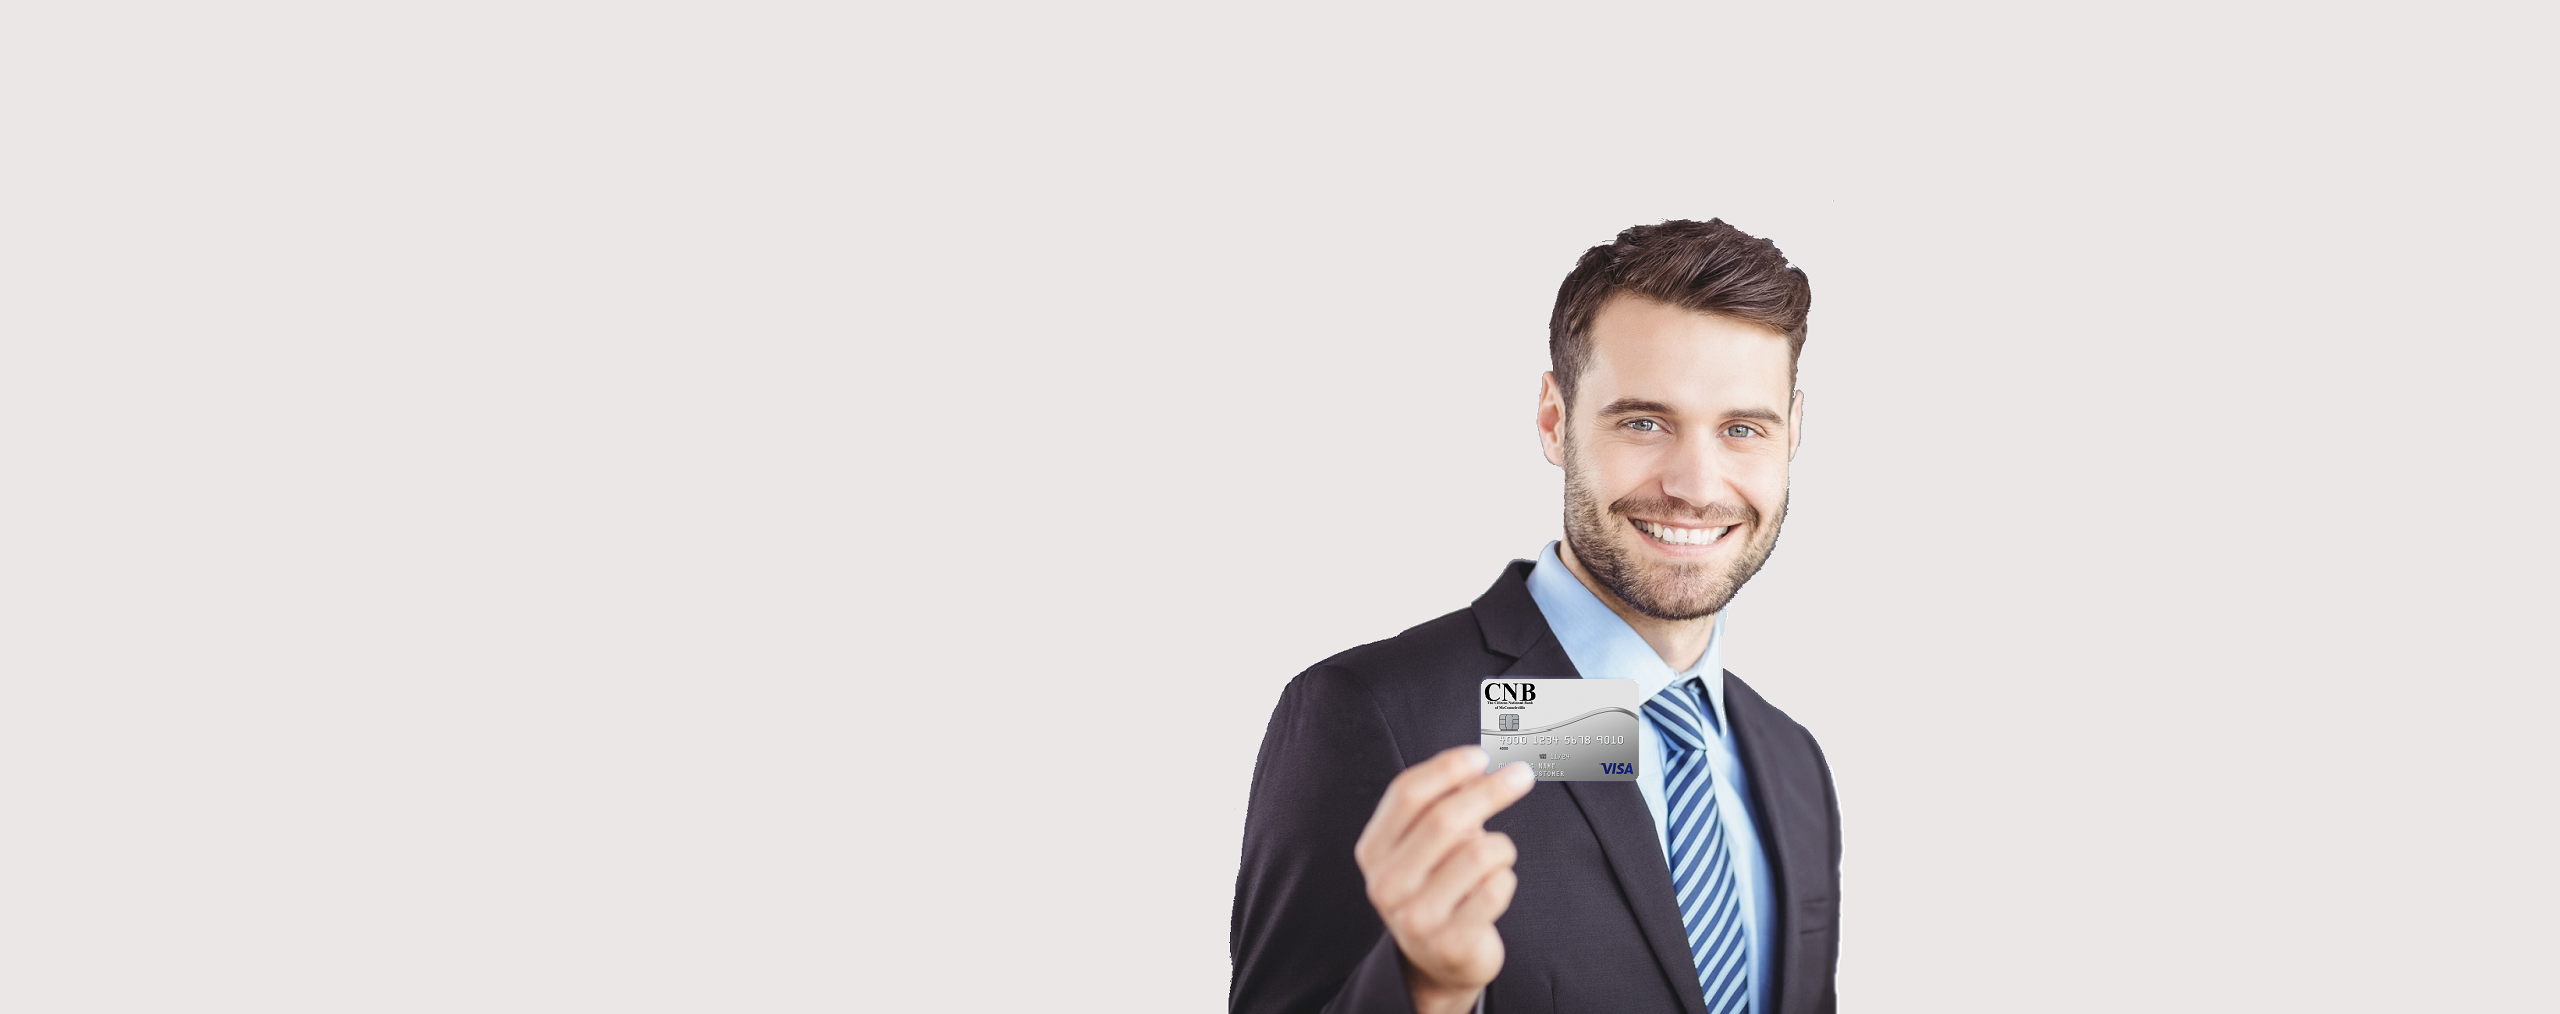 Business Apparel Man With Card